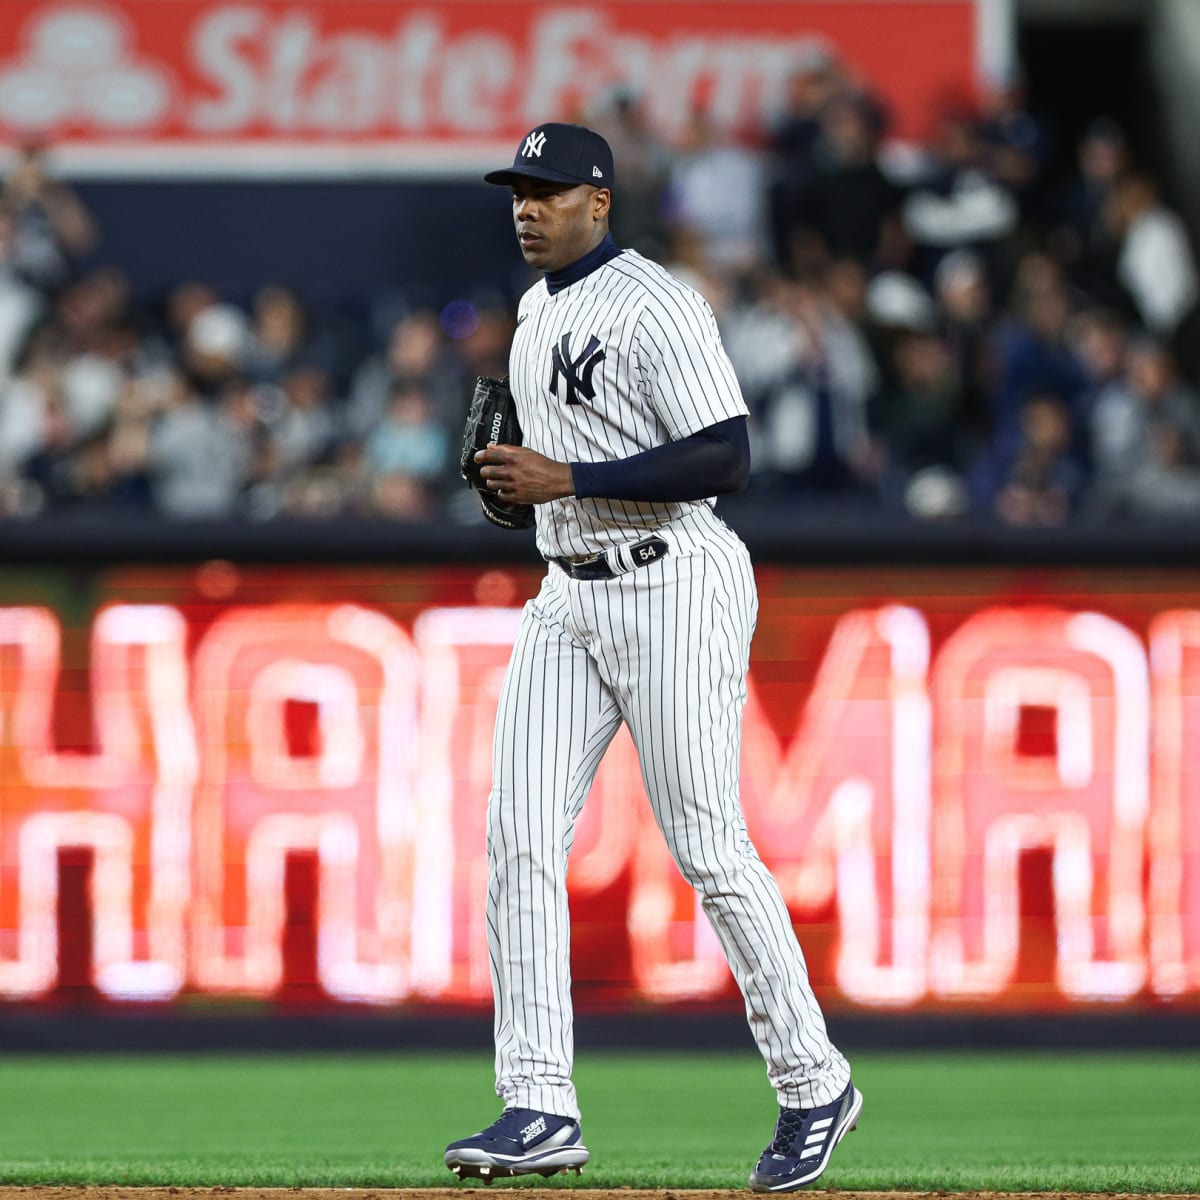 Yankees reliever Chapman out with infection from tattoo